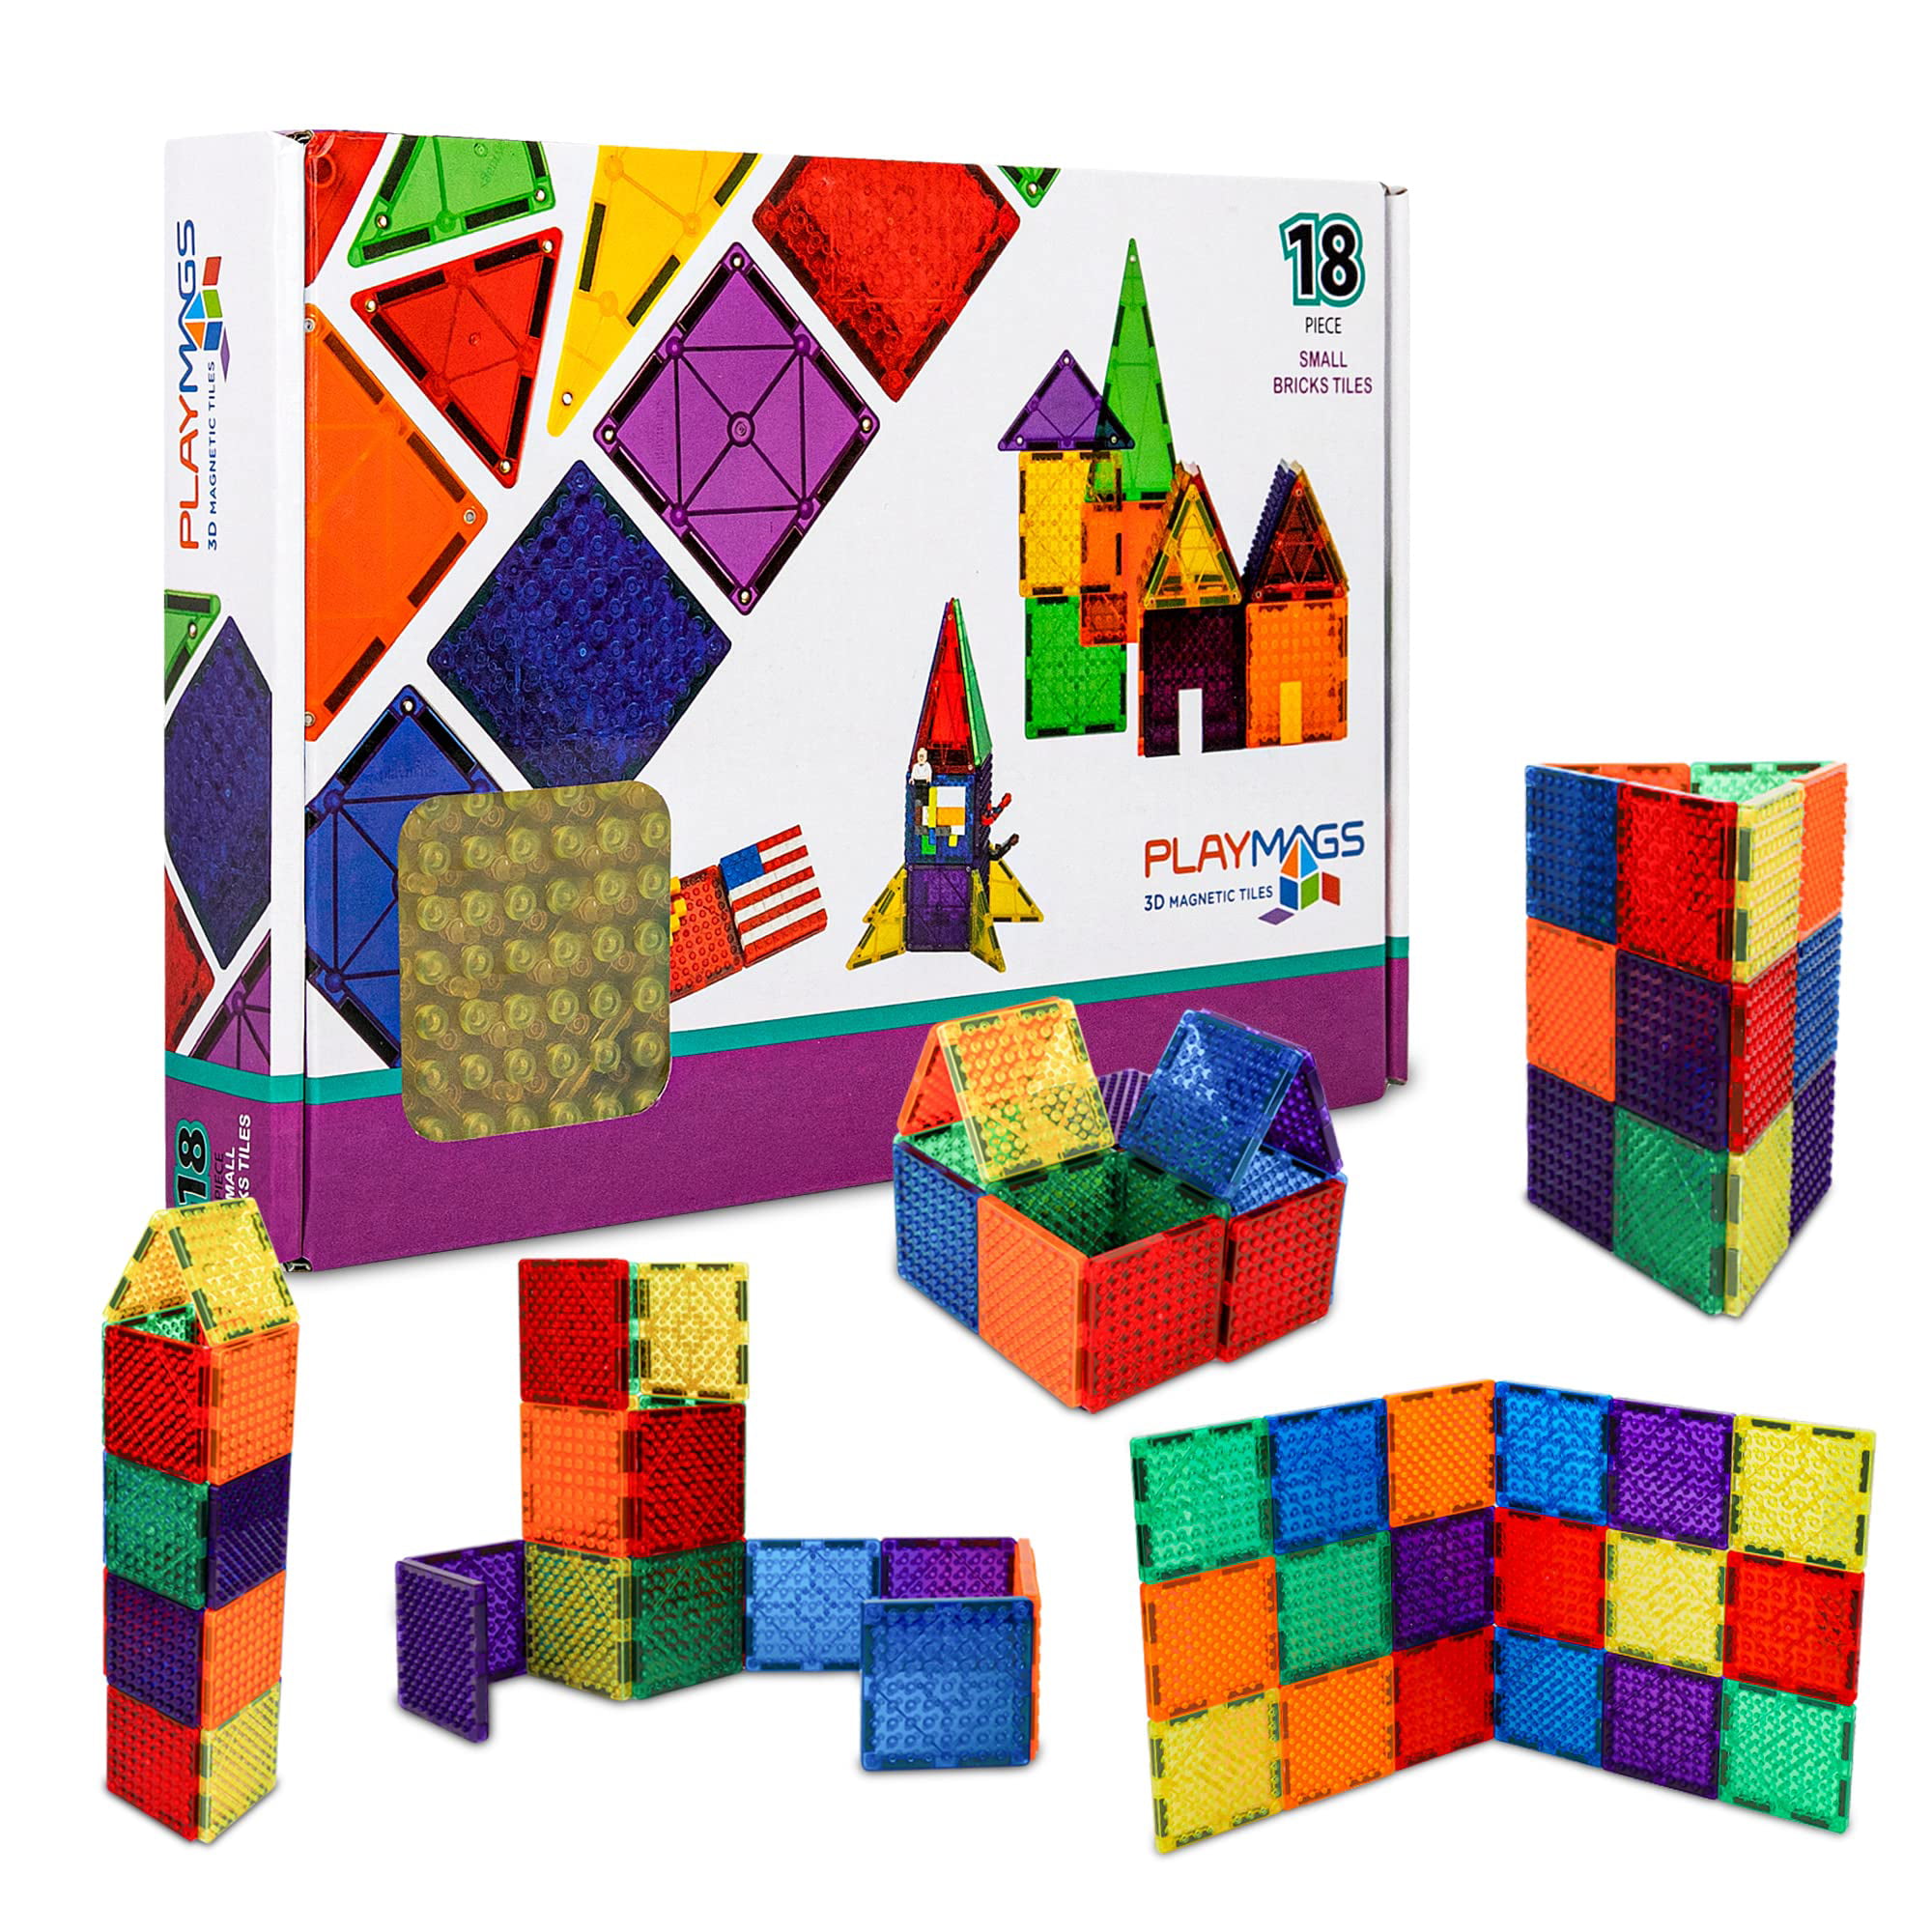 Playmags 100-Piece Colorful tile Set, Unique Award-Winning Magnetic  Building Tiles for Kids, Creativity and Educational Building Toys for  Children